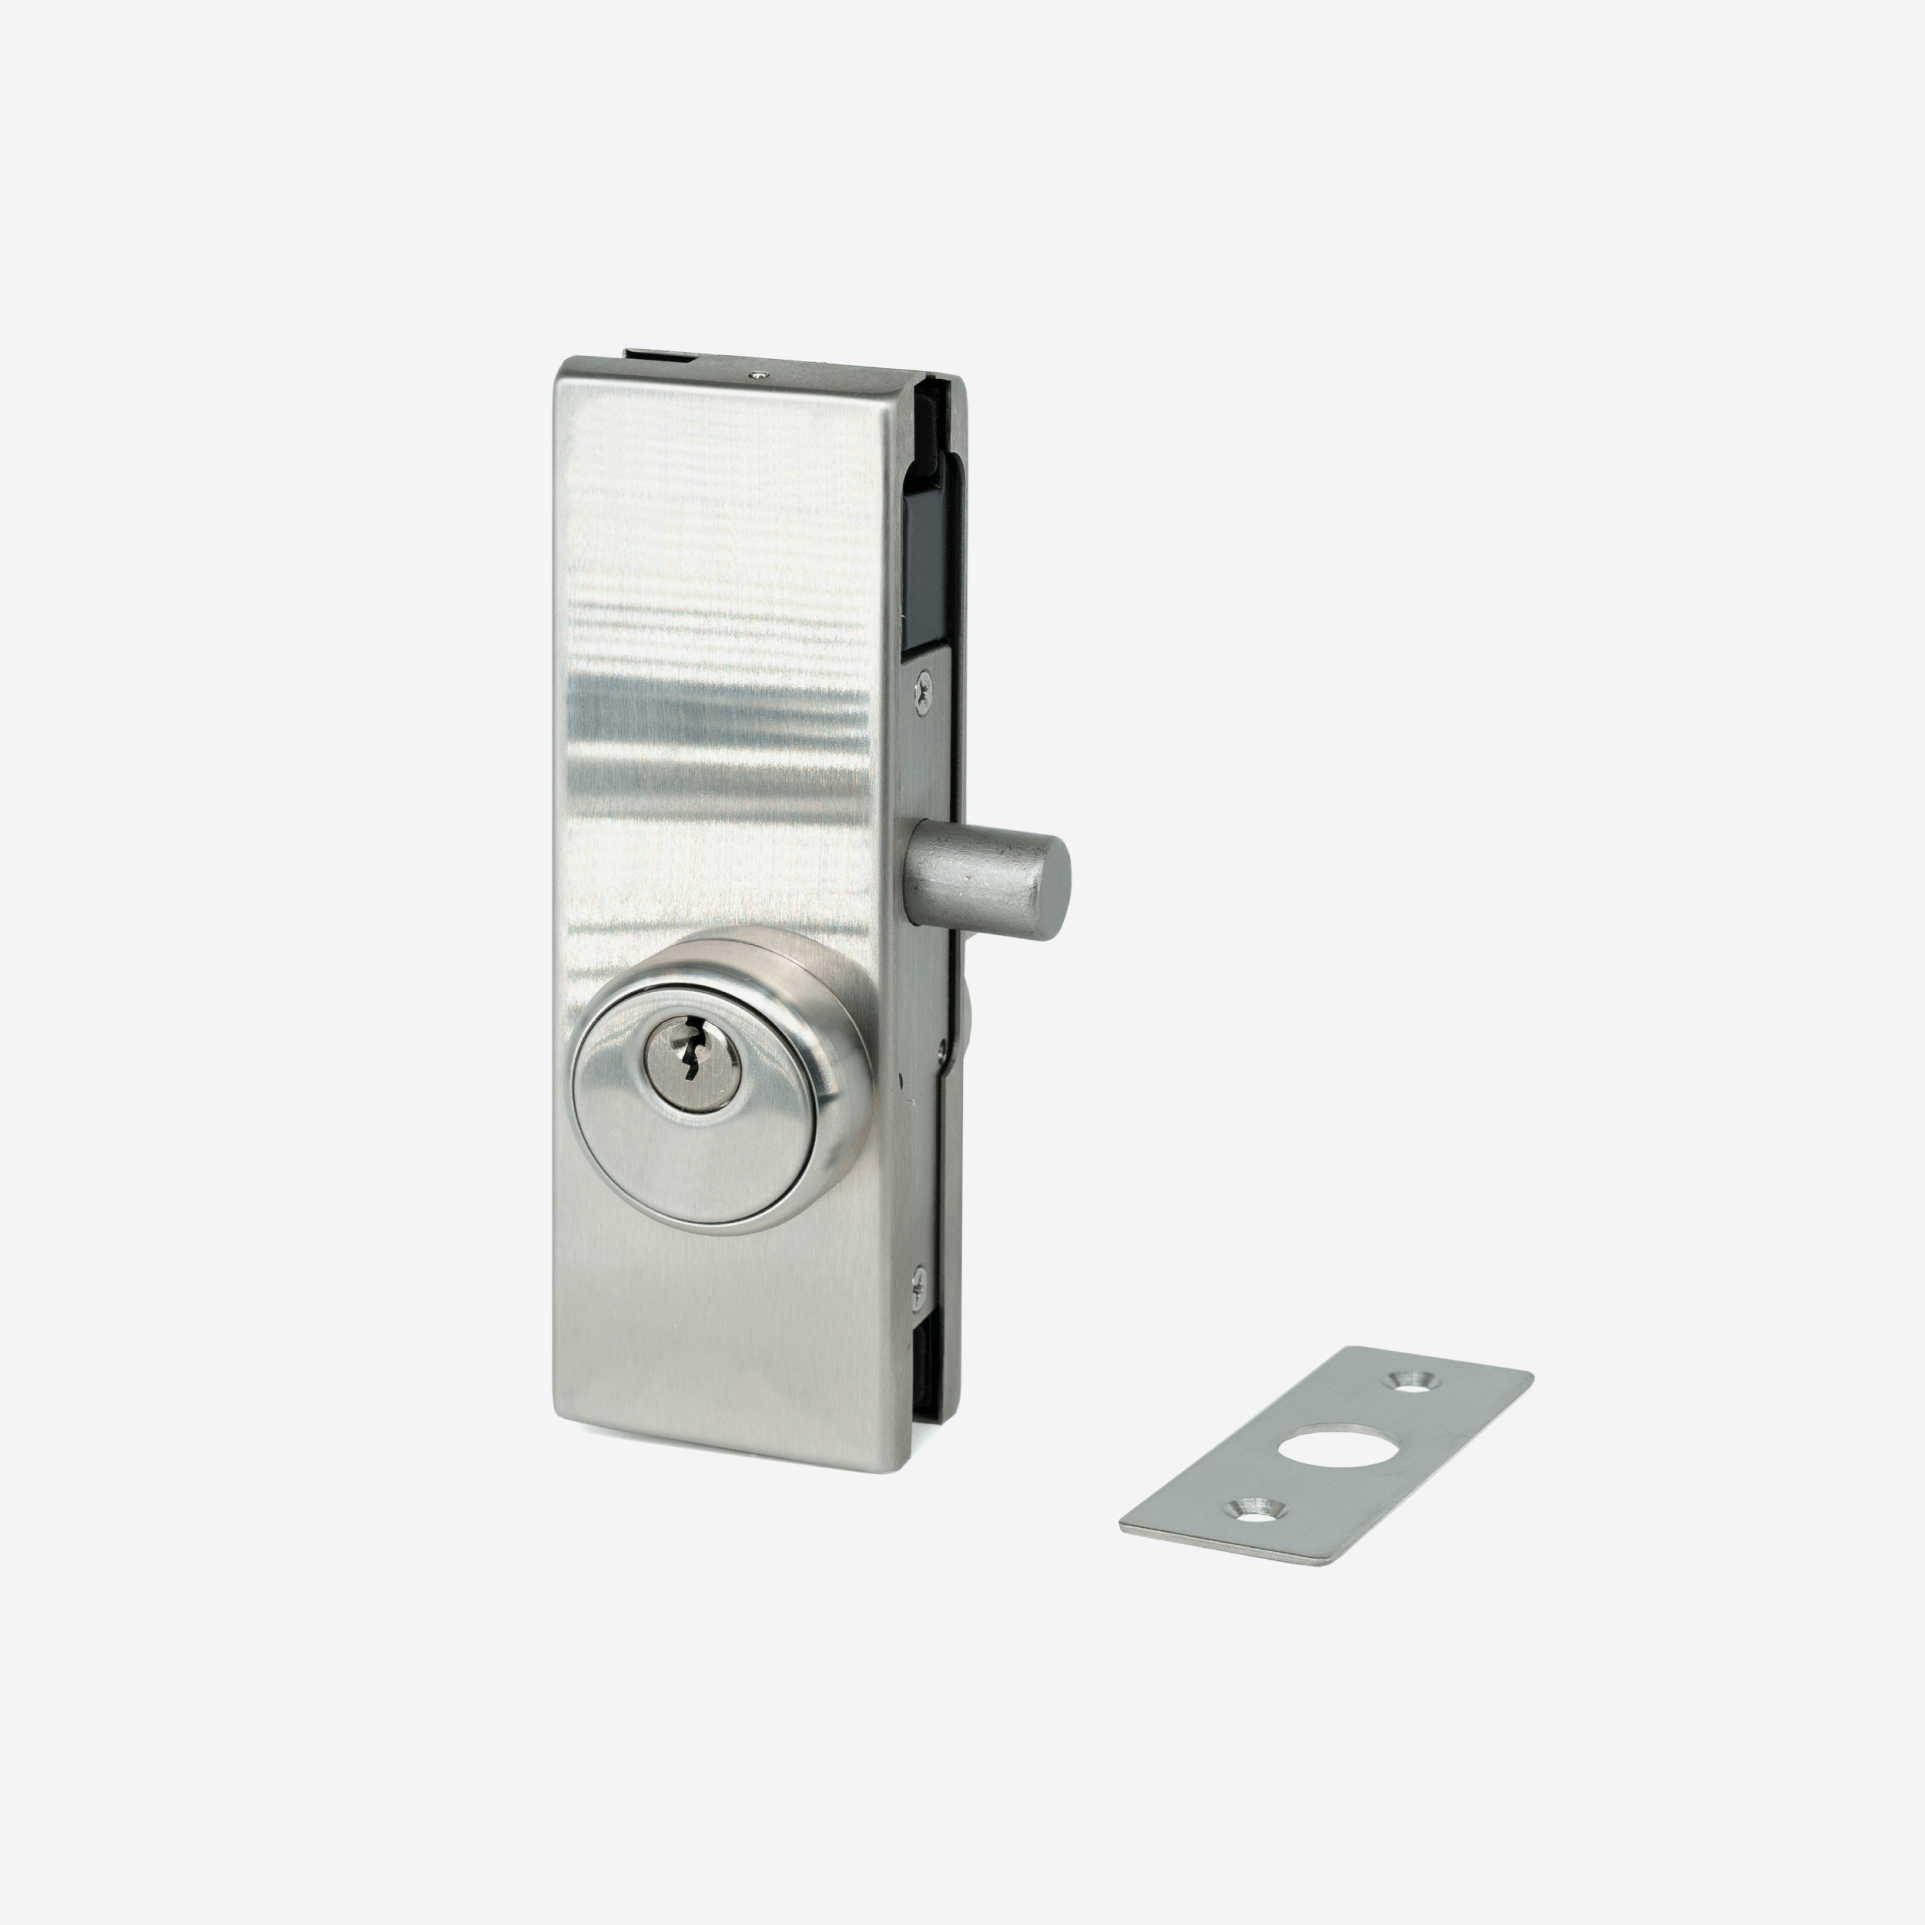 AMR Series Patch Lock - Satin stainless steel